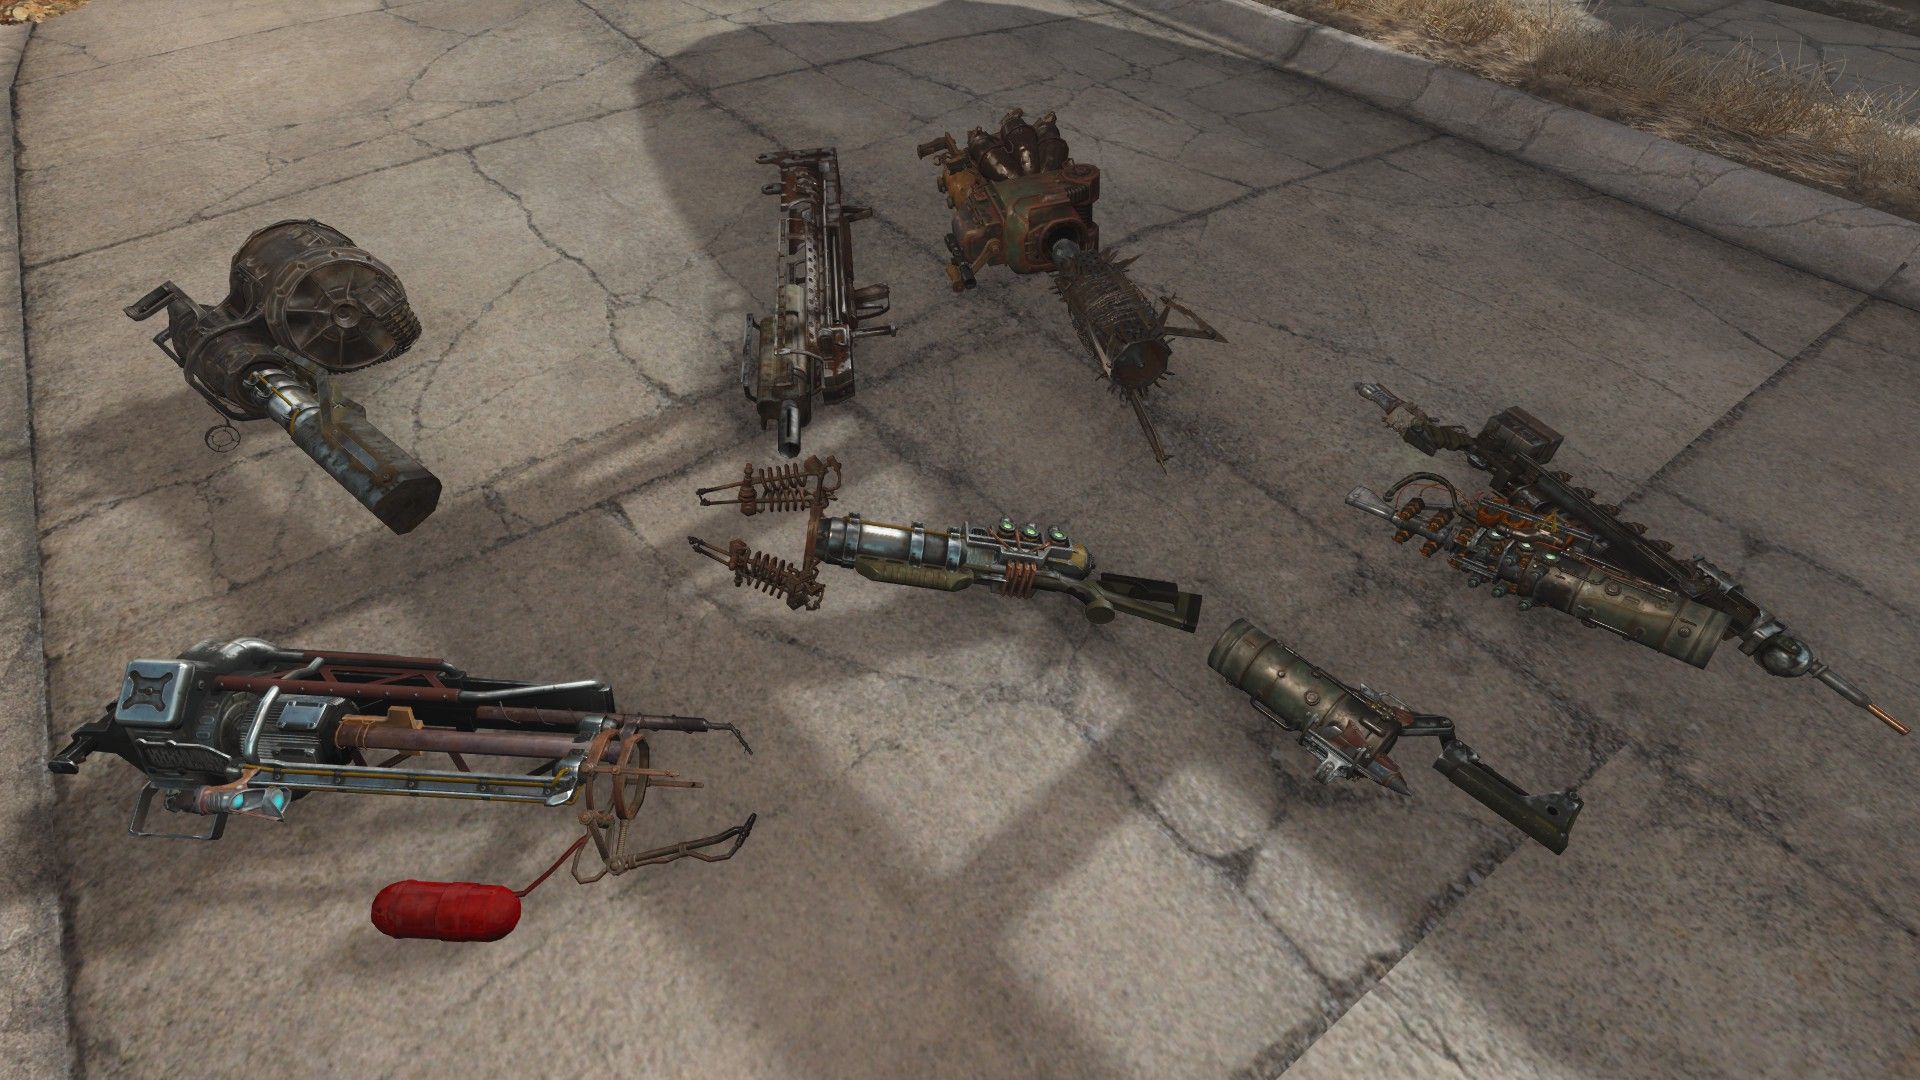 Arbitration button lowered weapons fallout 4 фото 25